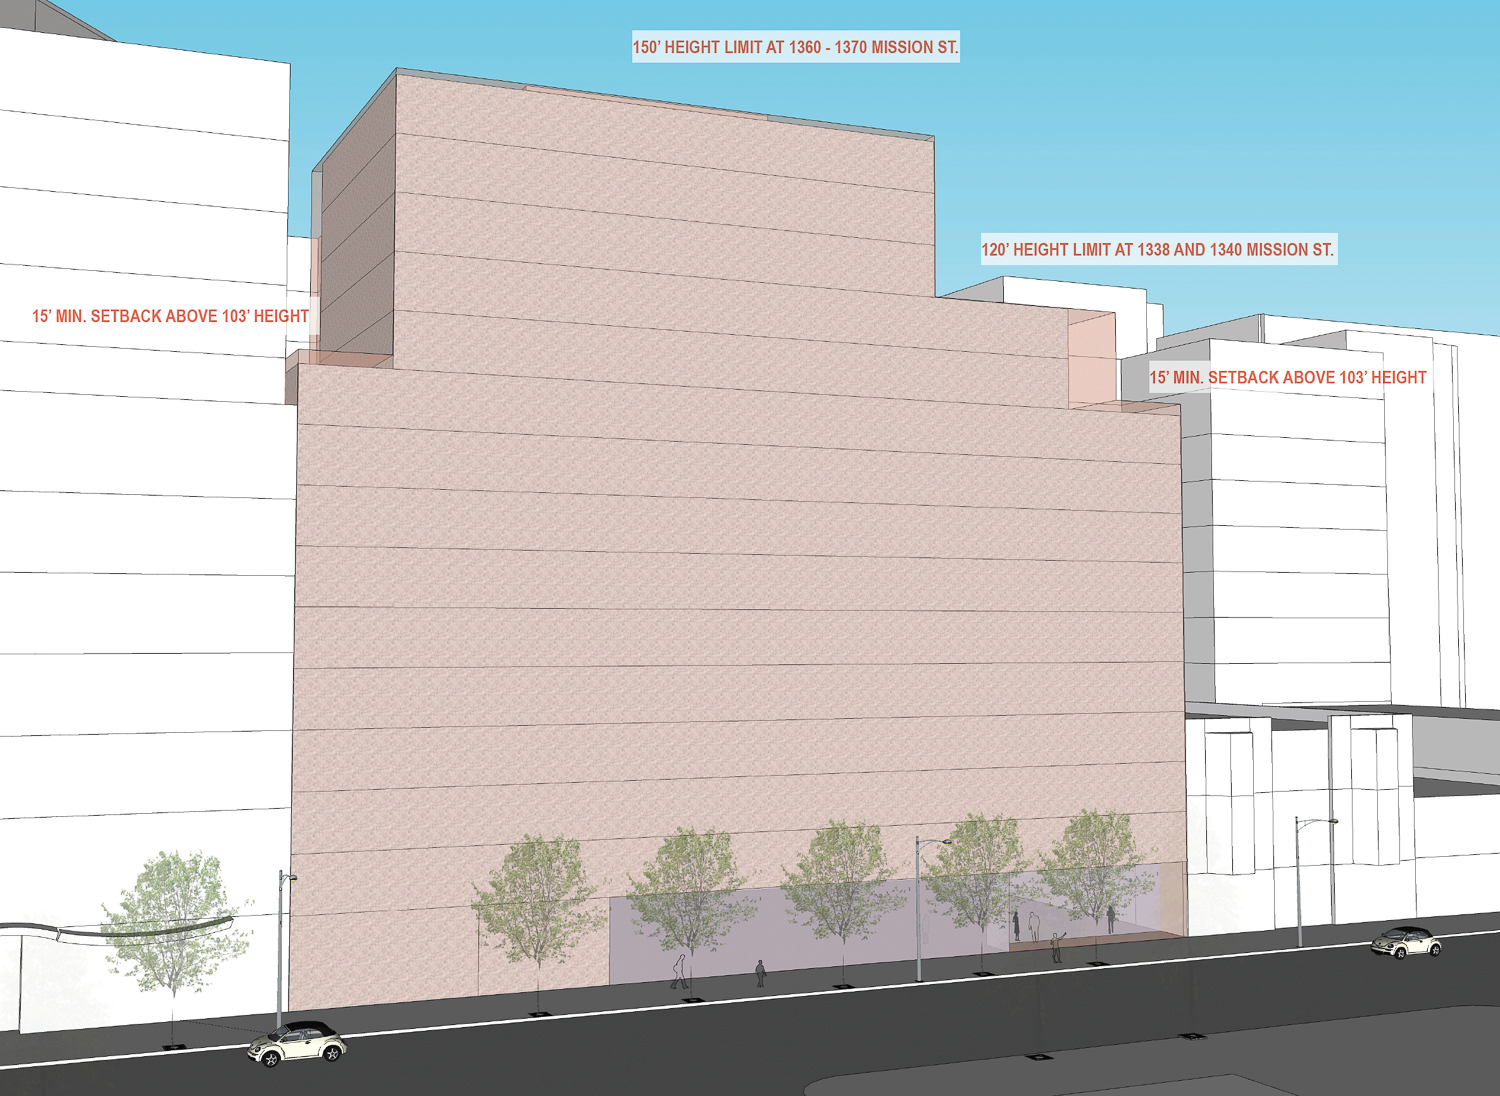 1338-1370 Mission Street base density without the state density bonus, rendering by SmithGroup